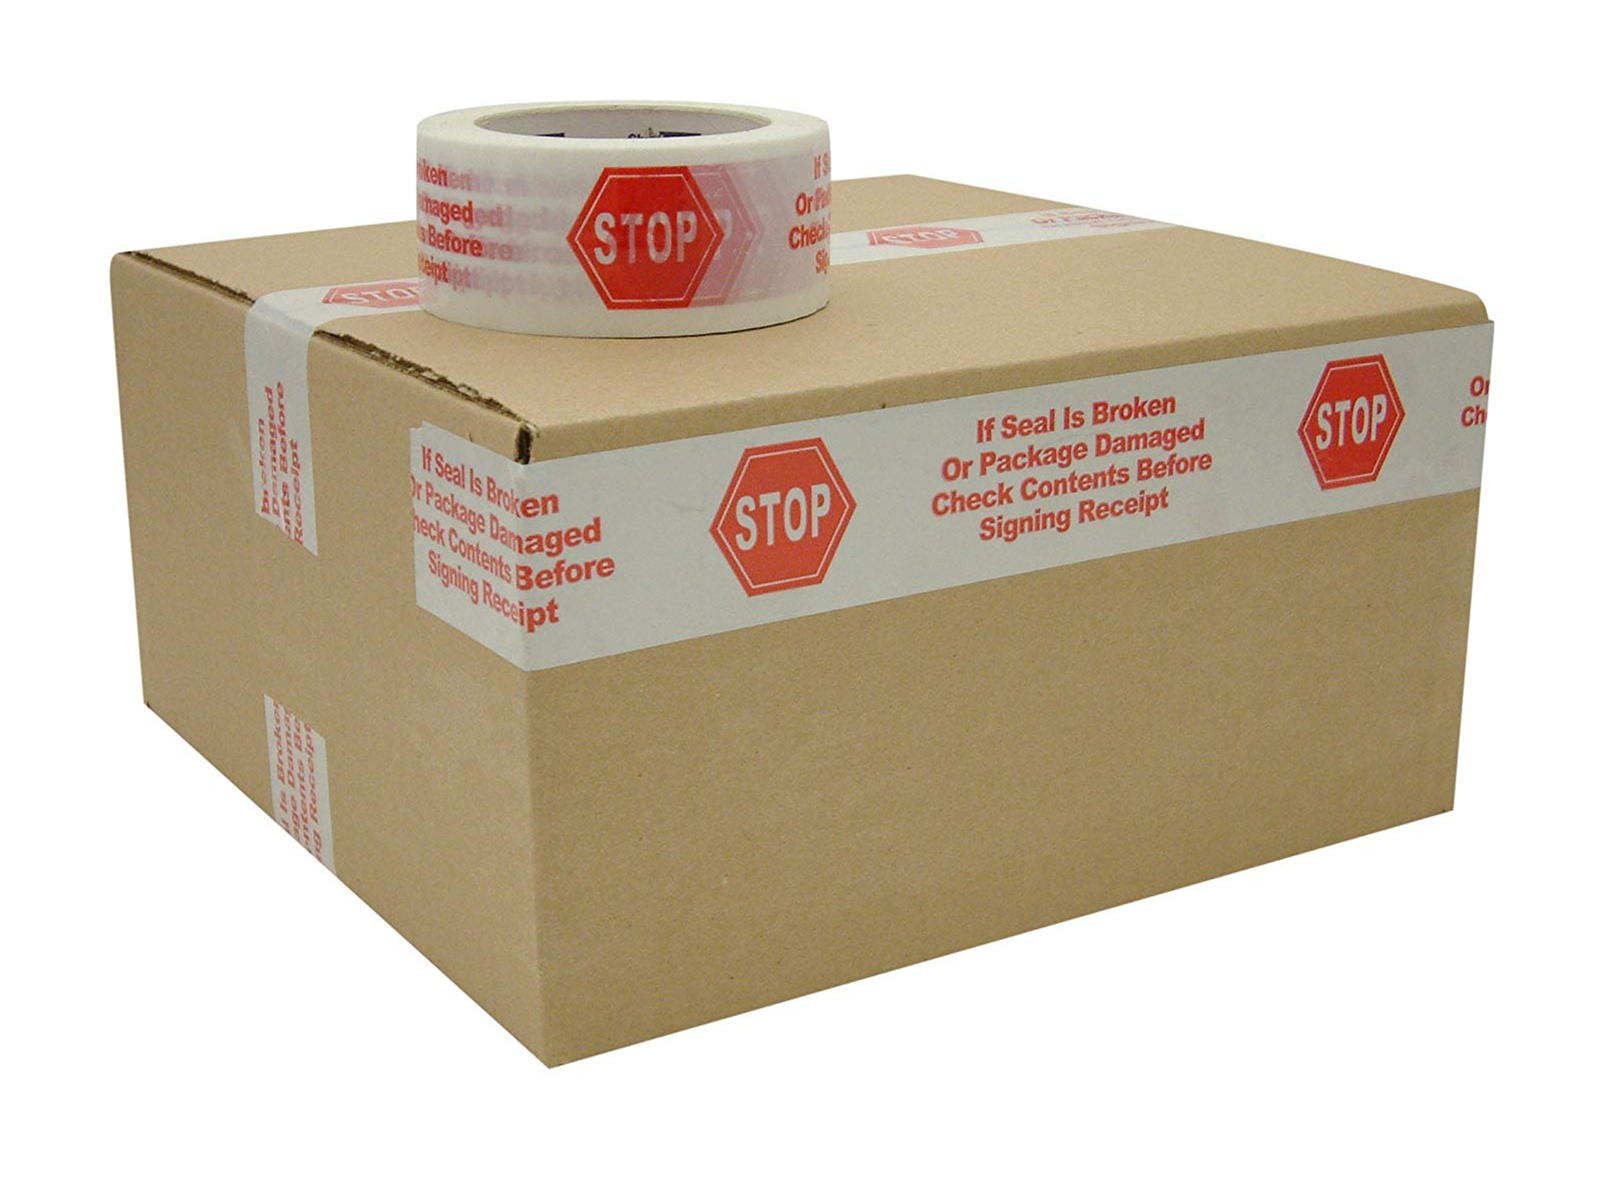 SECURITY CARTON SEALING TAPE. HP240 STOP WHITE WITH RED